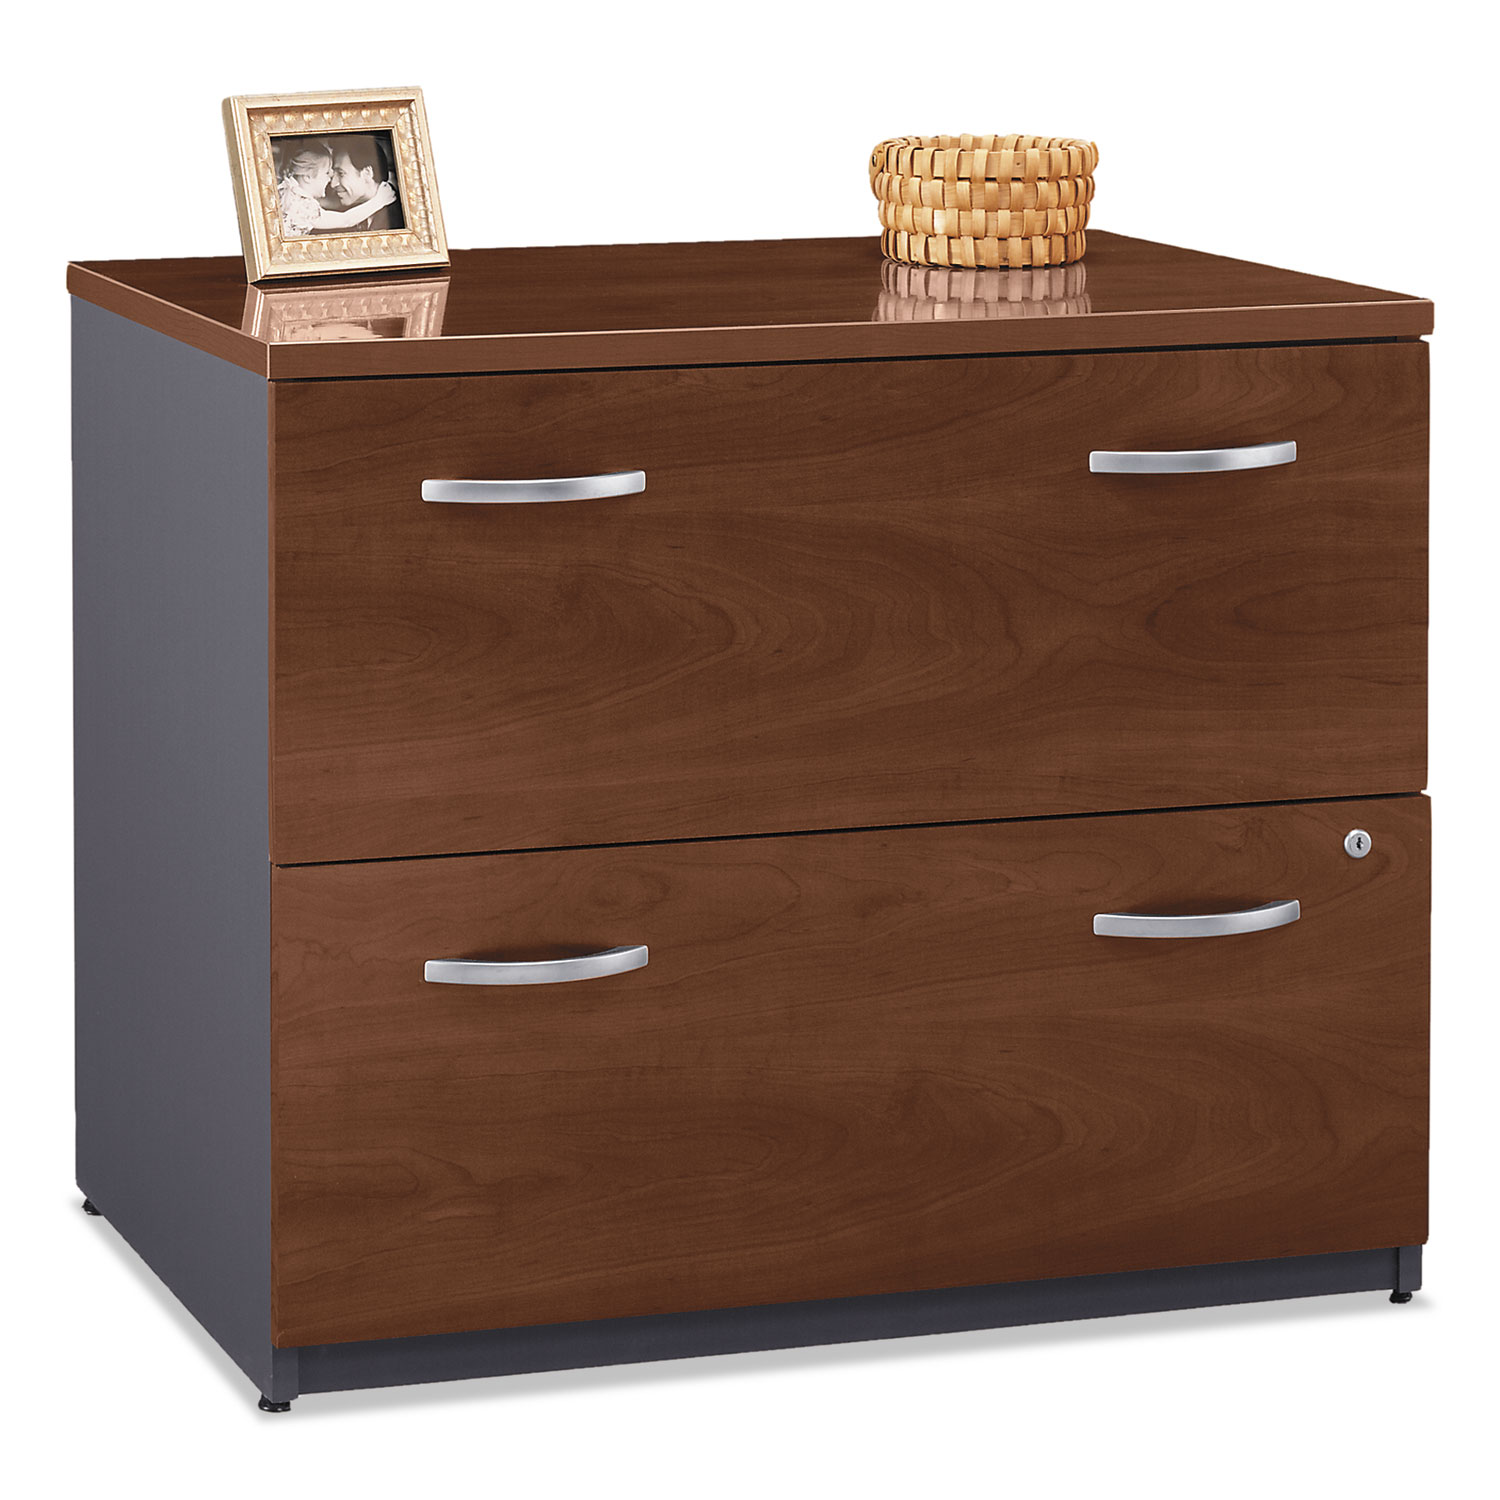 Series C Collection 2 Drawer 36W Lateral File (Assembled), Hansen Cherry